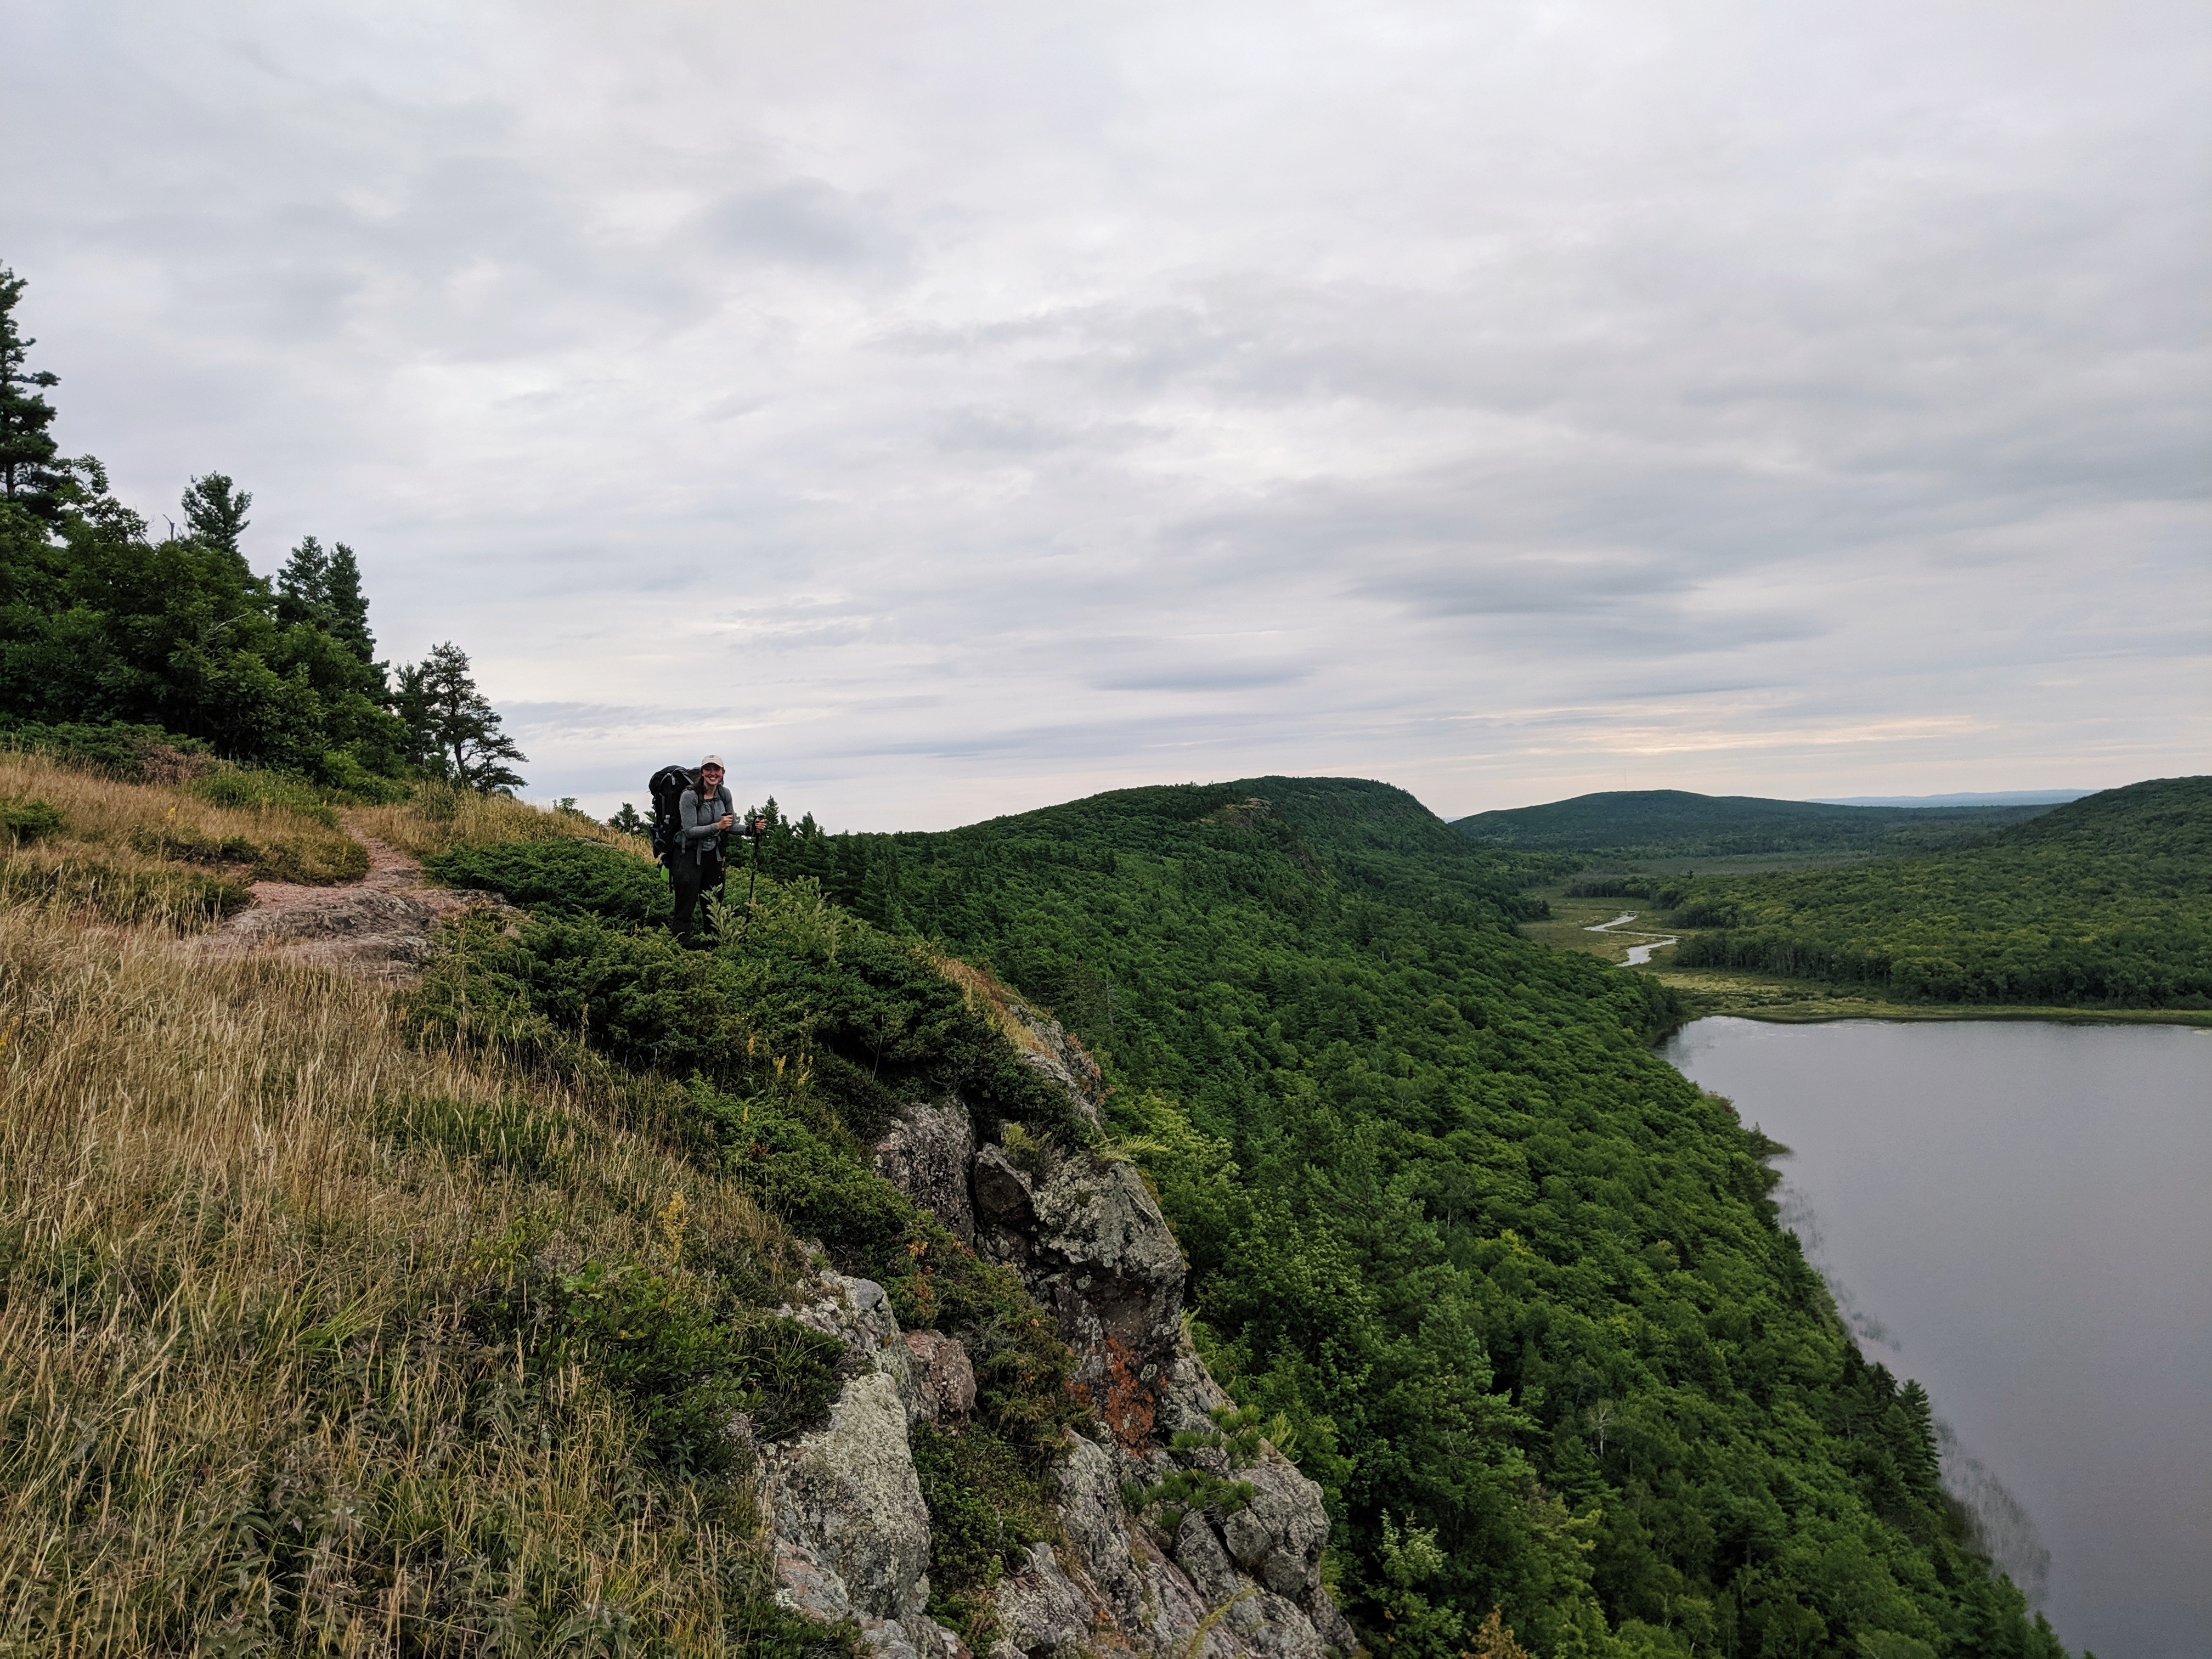 Lake of the Clouds in the Porcupine Mountains in Michigan's Upper Peninsula